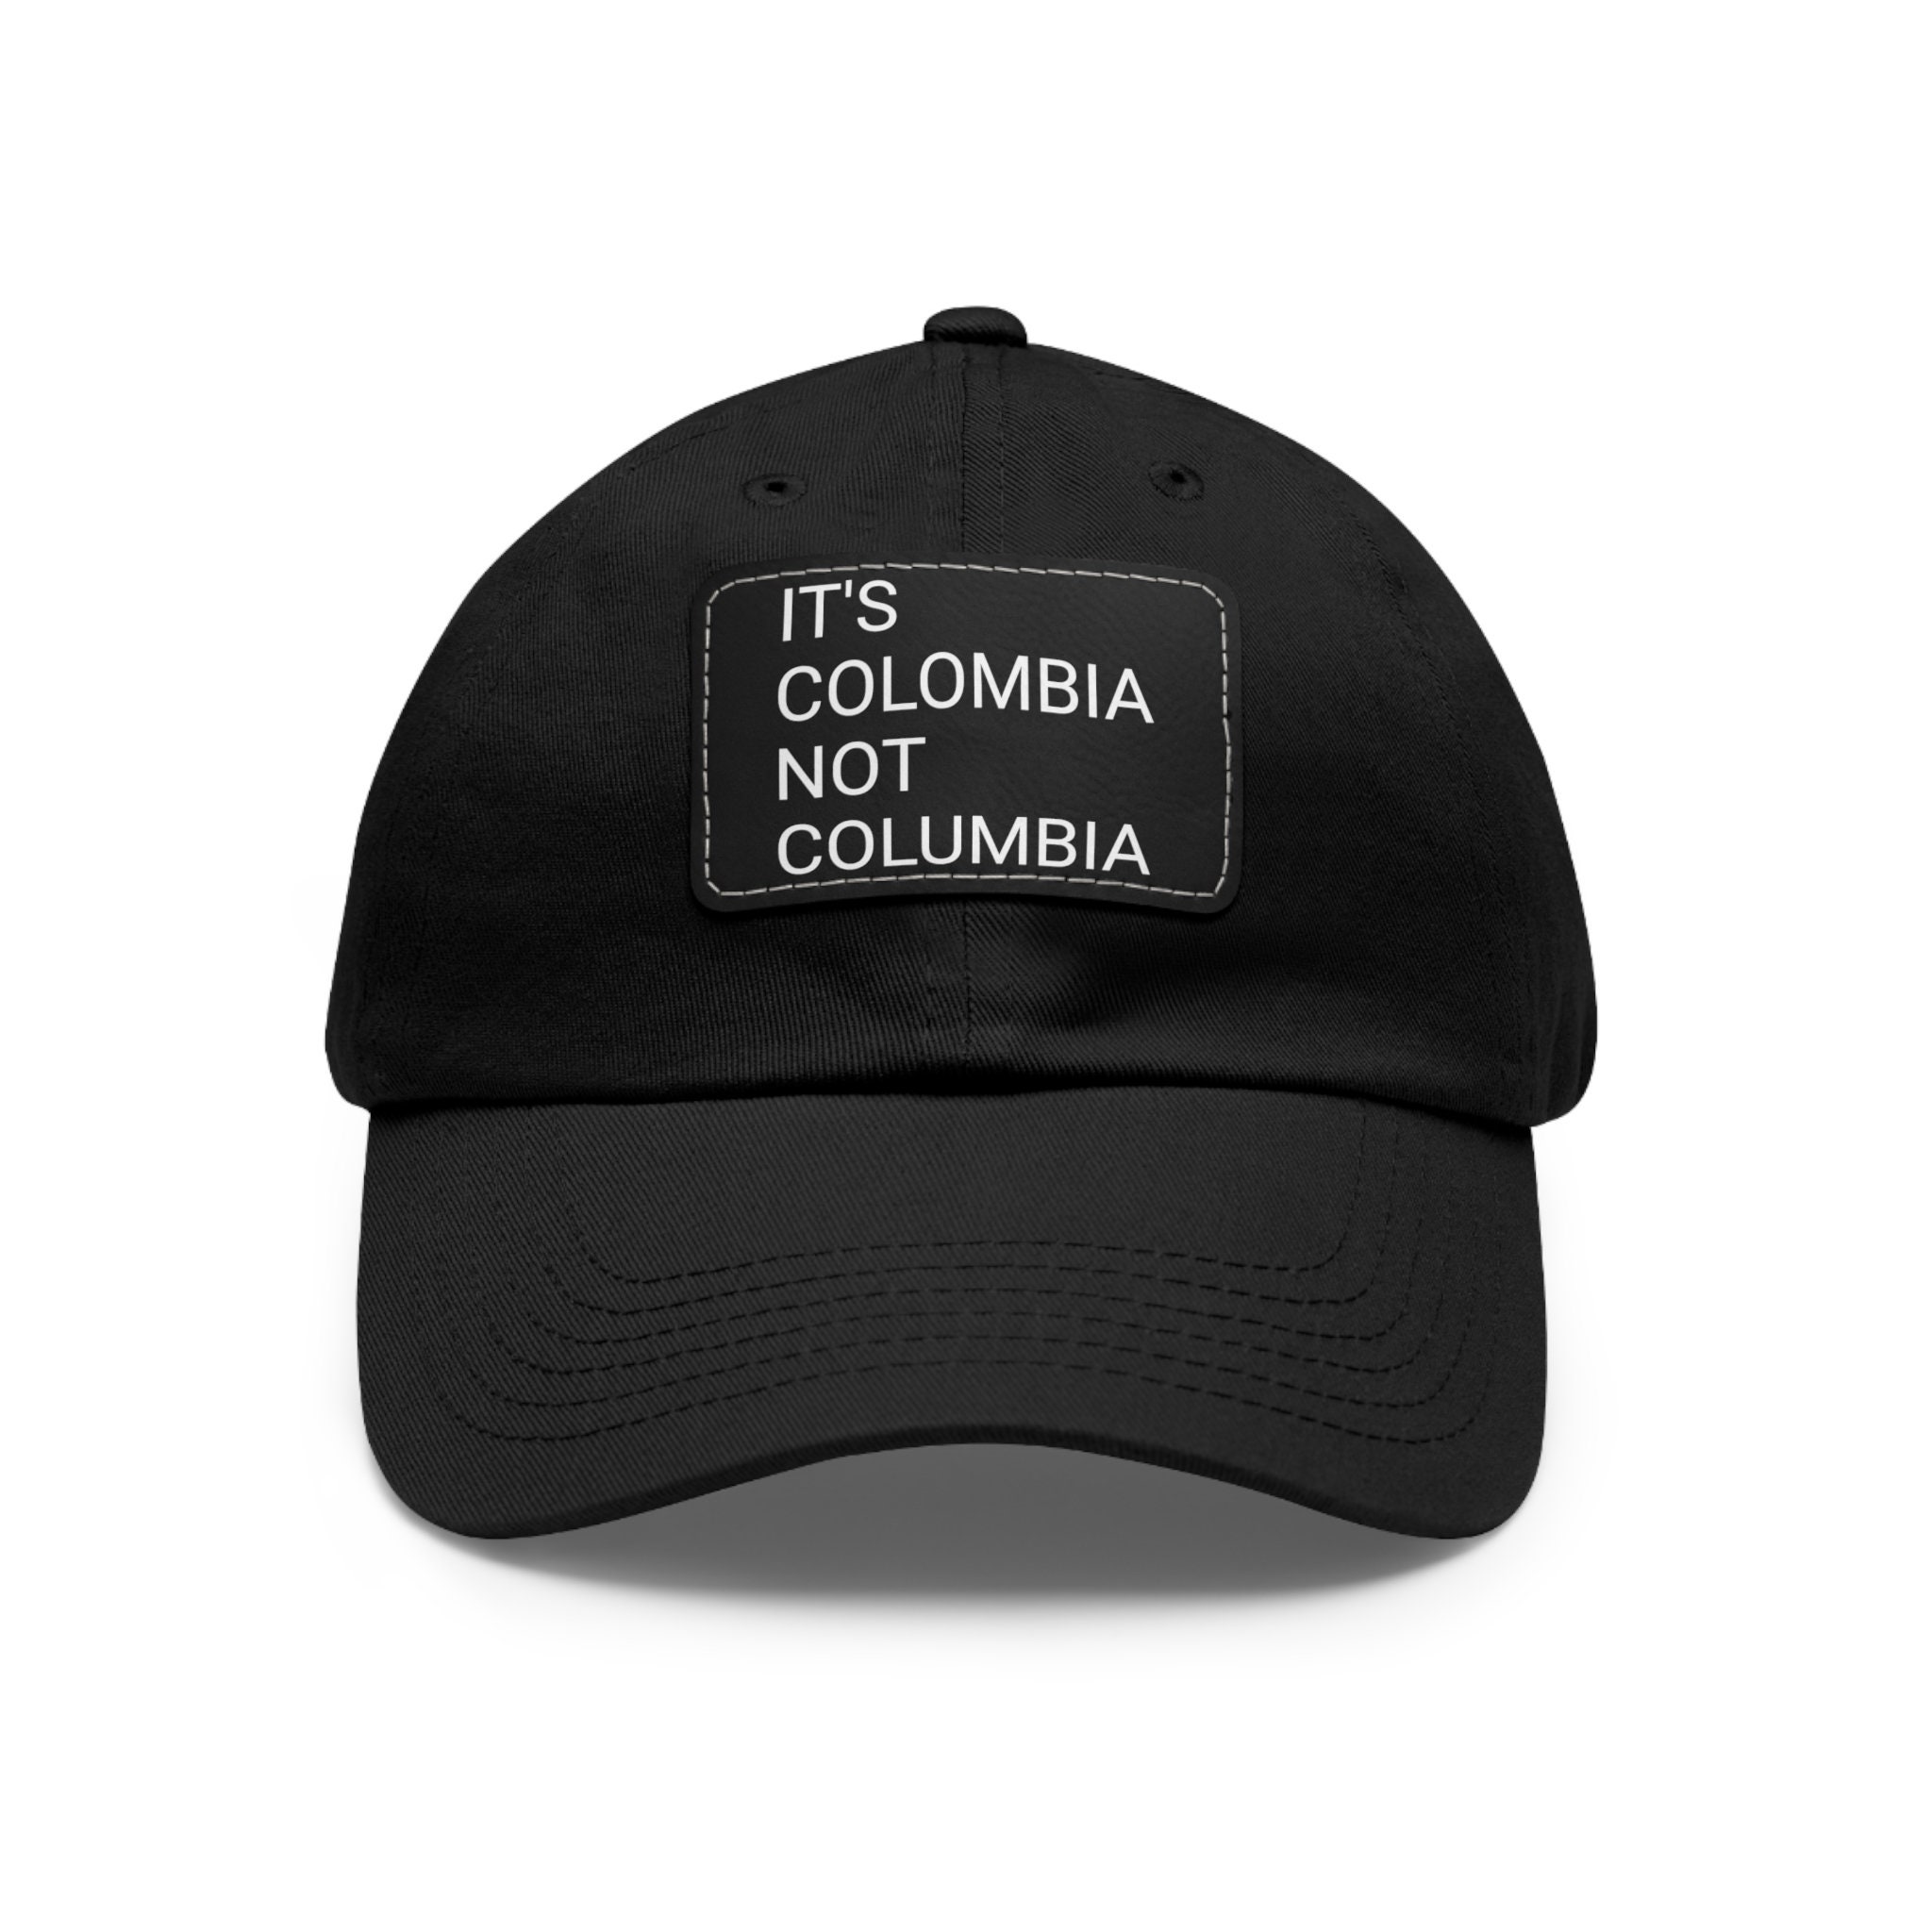 It's Colombia, Not Columbia Hat - Gift For Colombian Pride Proud Colombia Heritage Cultural Awareness Funny Hat